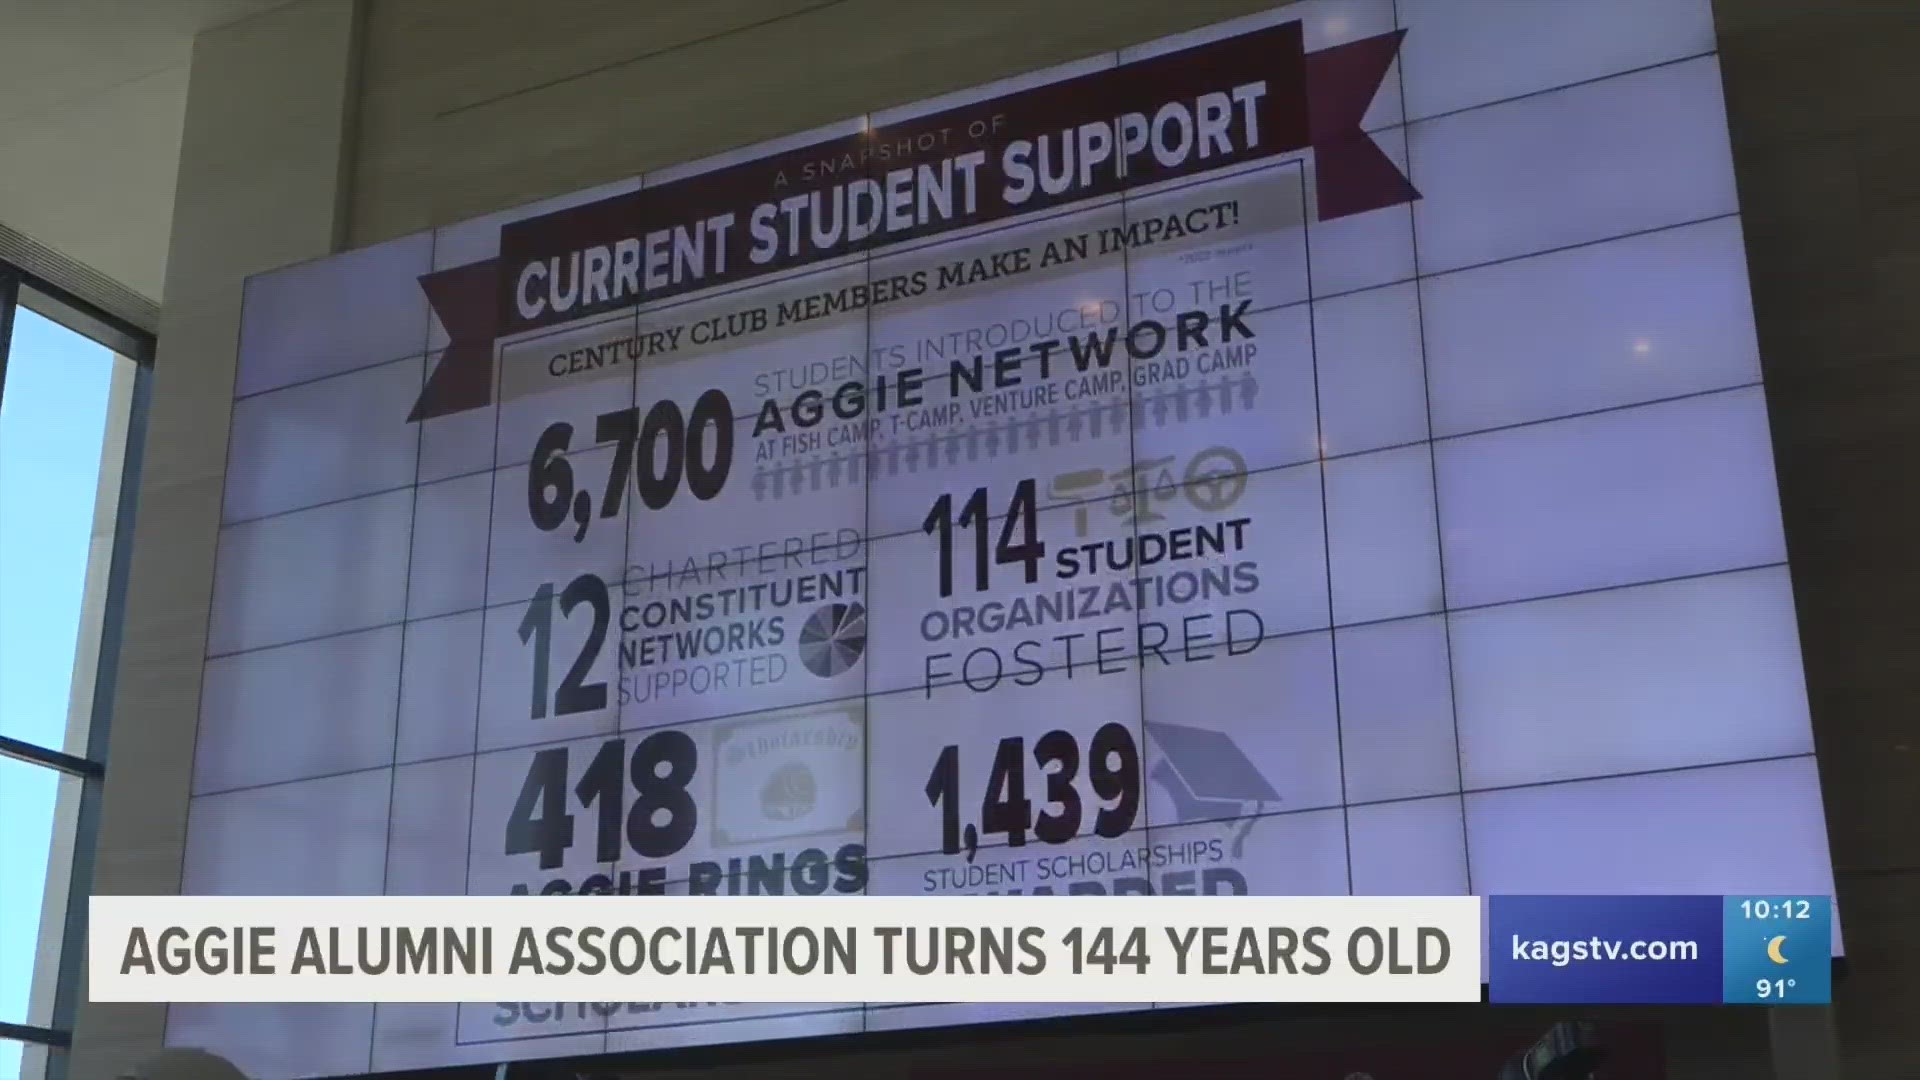 On Monday, The Association of Former Students at Texas A&M University turned 144 years old, and sports over half a million former students in its ranks.